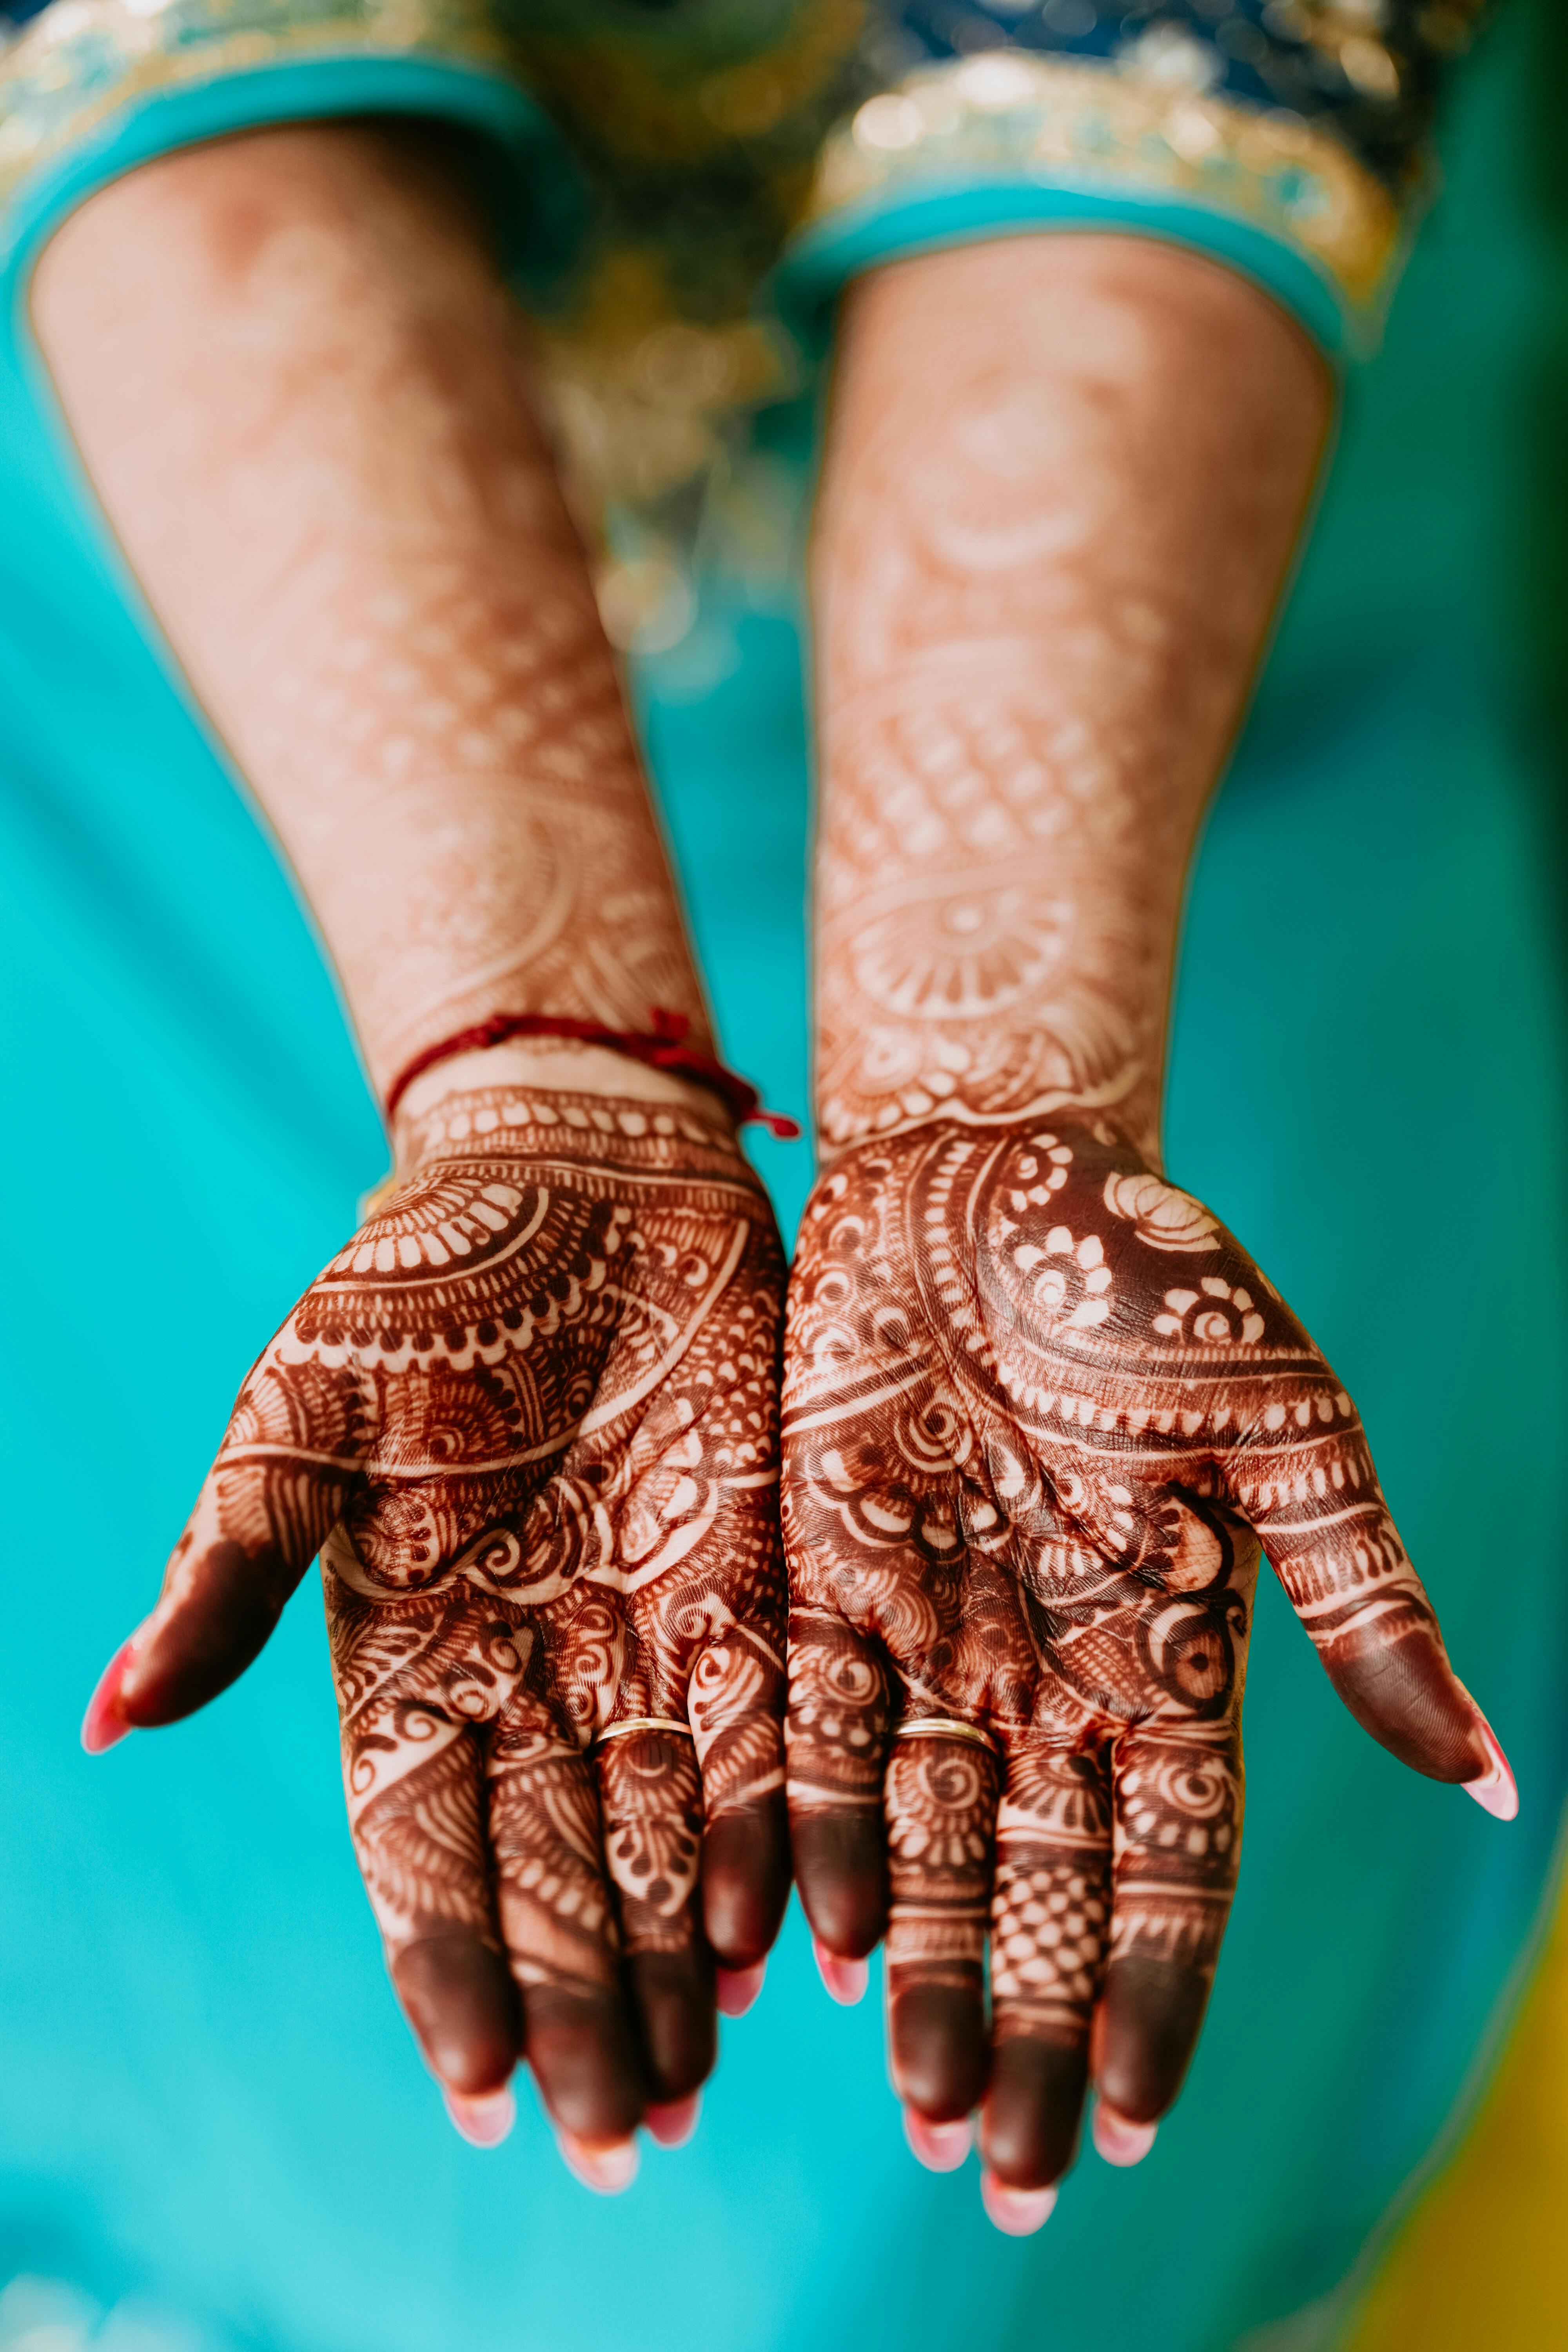 A Person's Hands with Henna Tattoos · Free Stock Photo